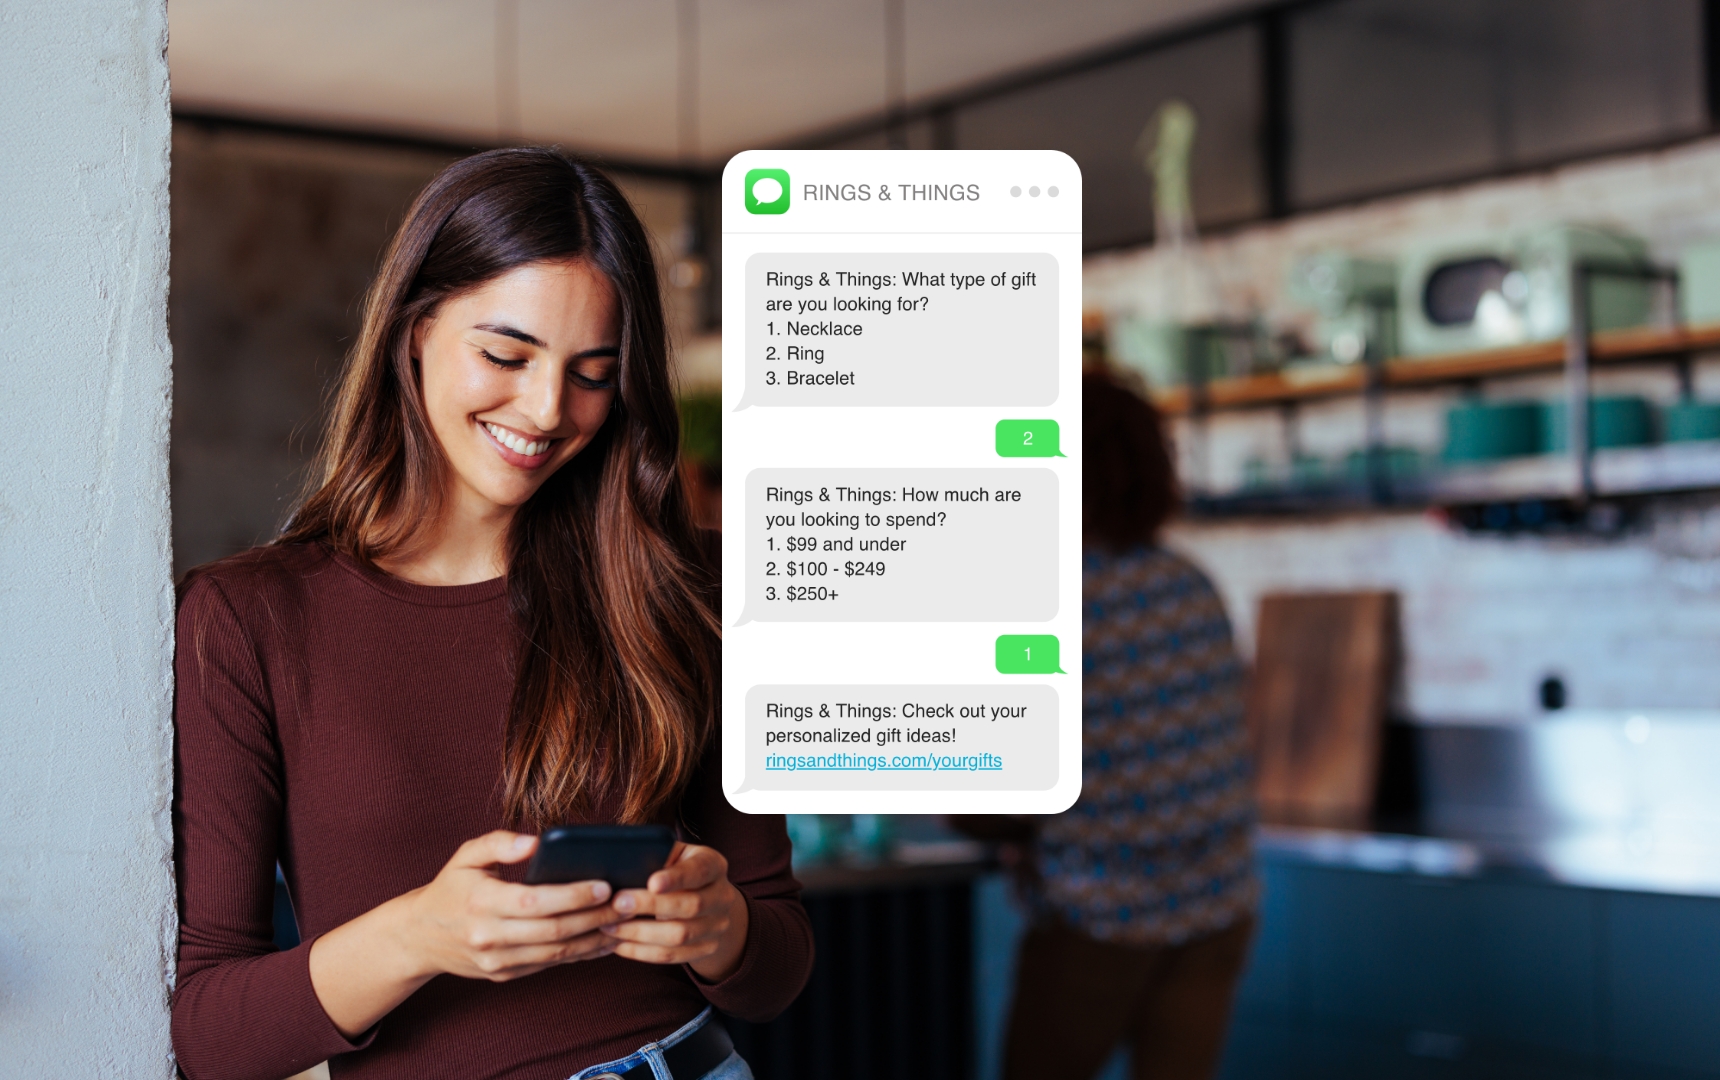 A conversational commerce exchange via SMS conversation between a business and a customer